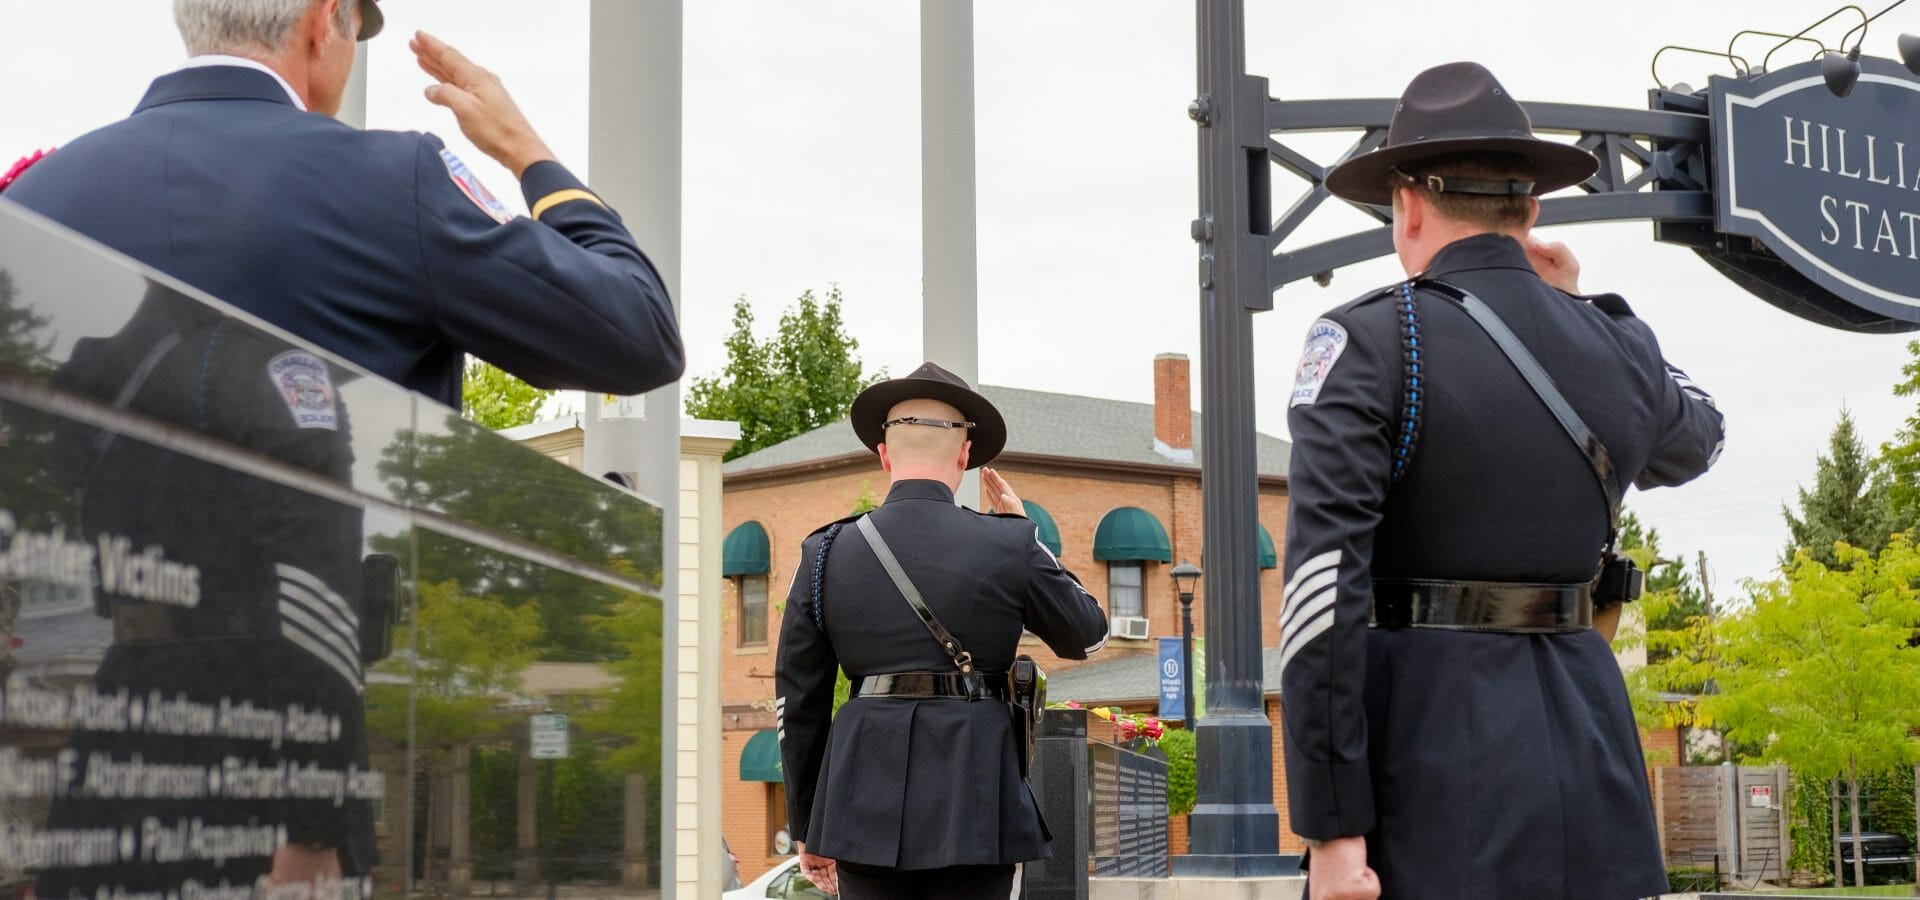 Officers saluting flag